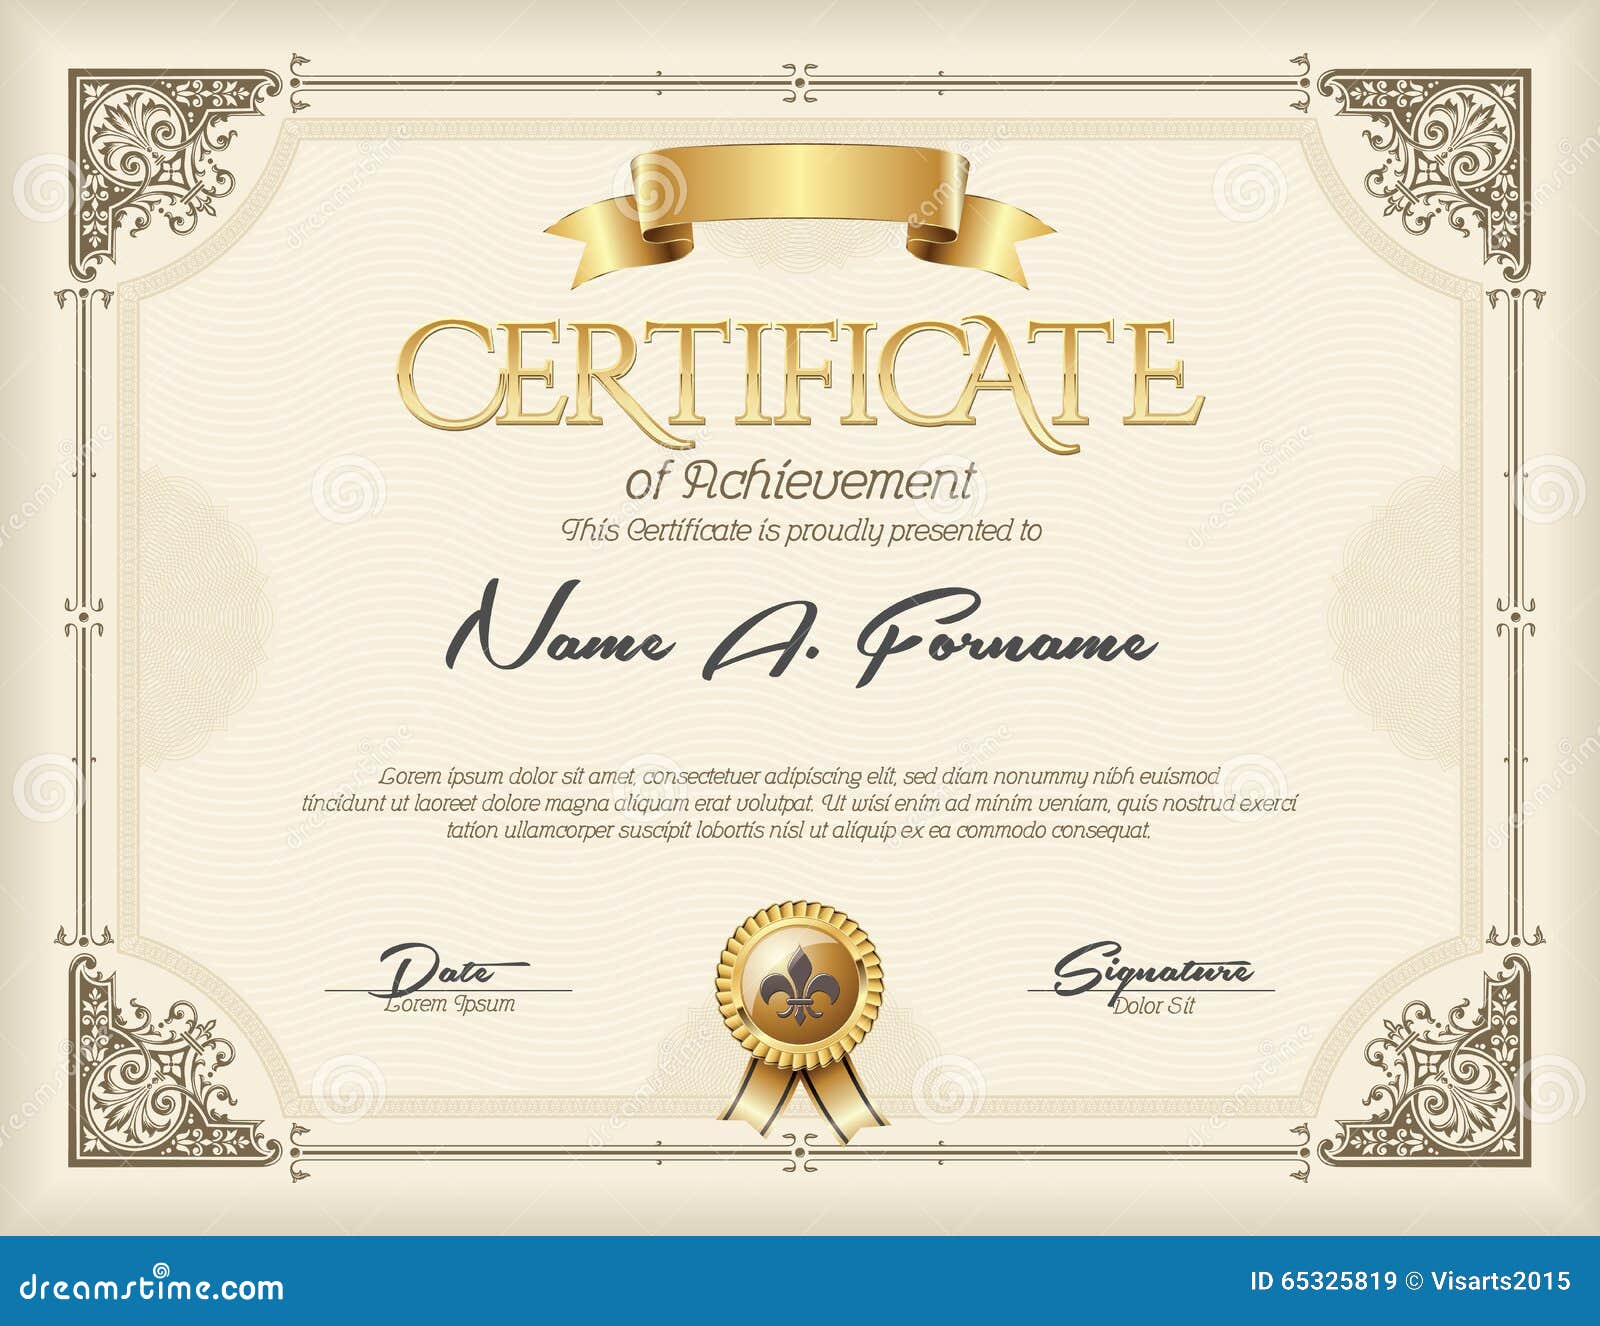 certificate of achievement vintage gold frame